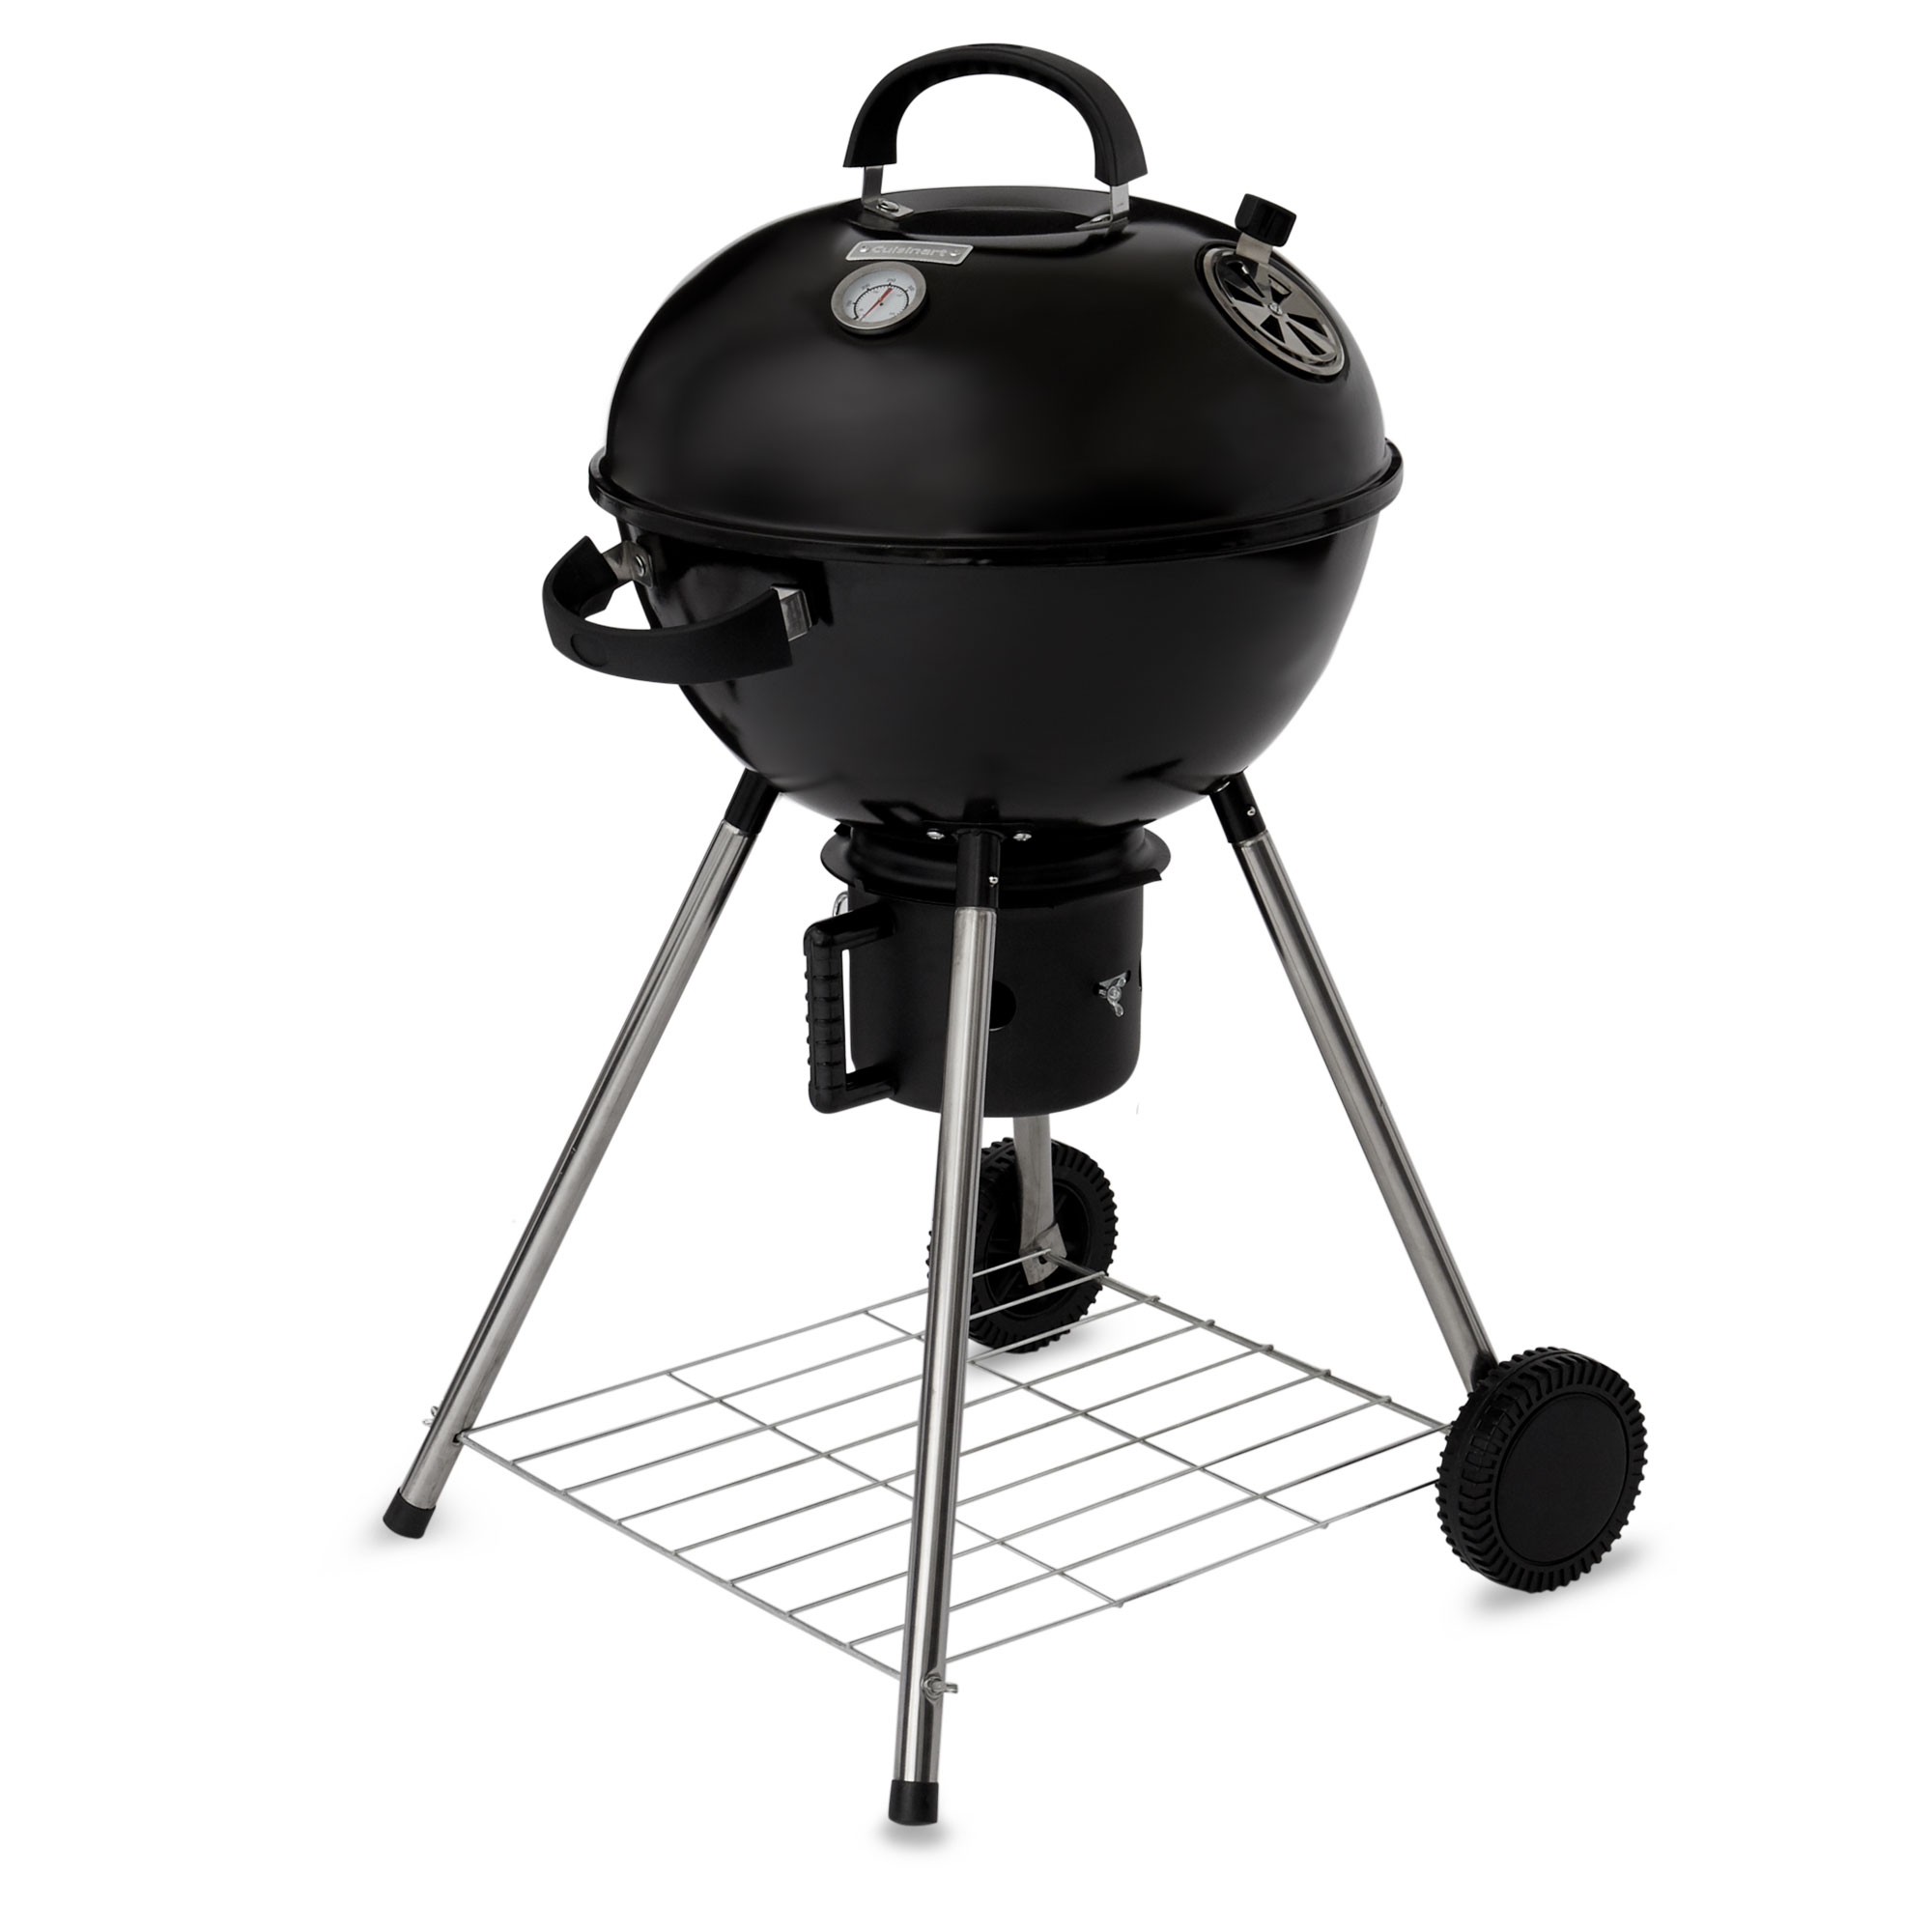 Cuisinart 18' Kettle Charcoal Grill Black - image 1 of 8